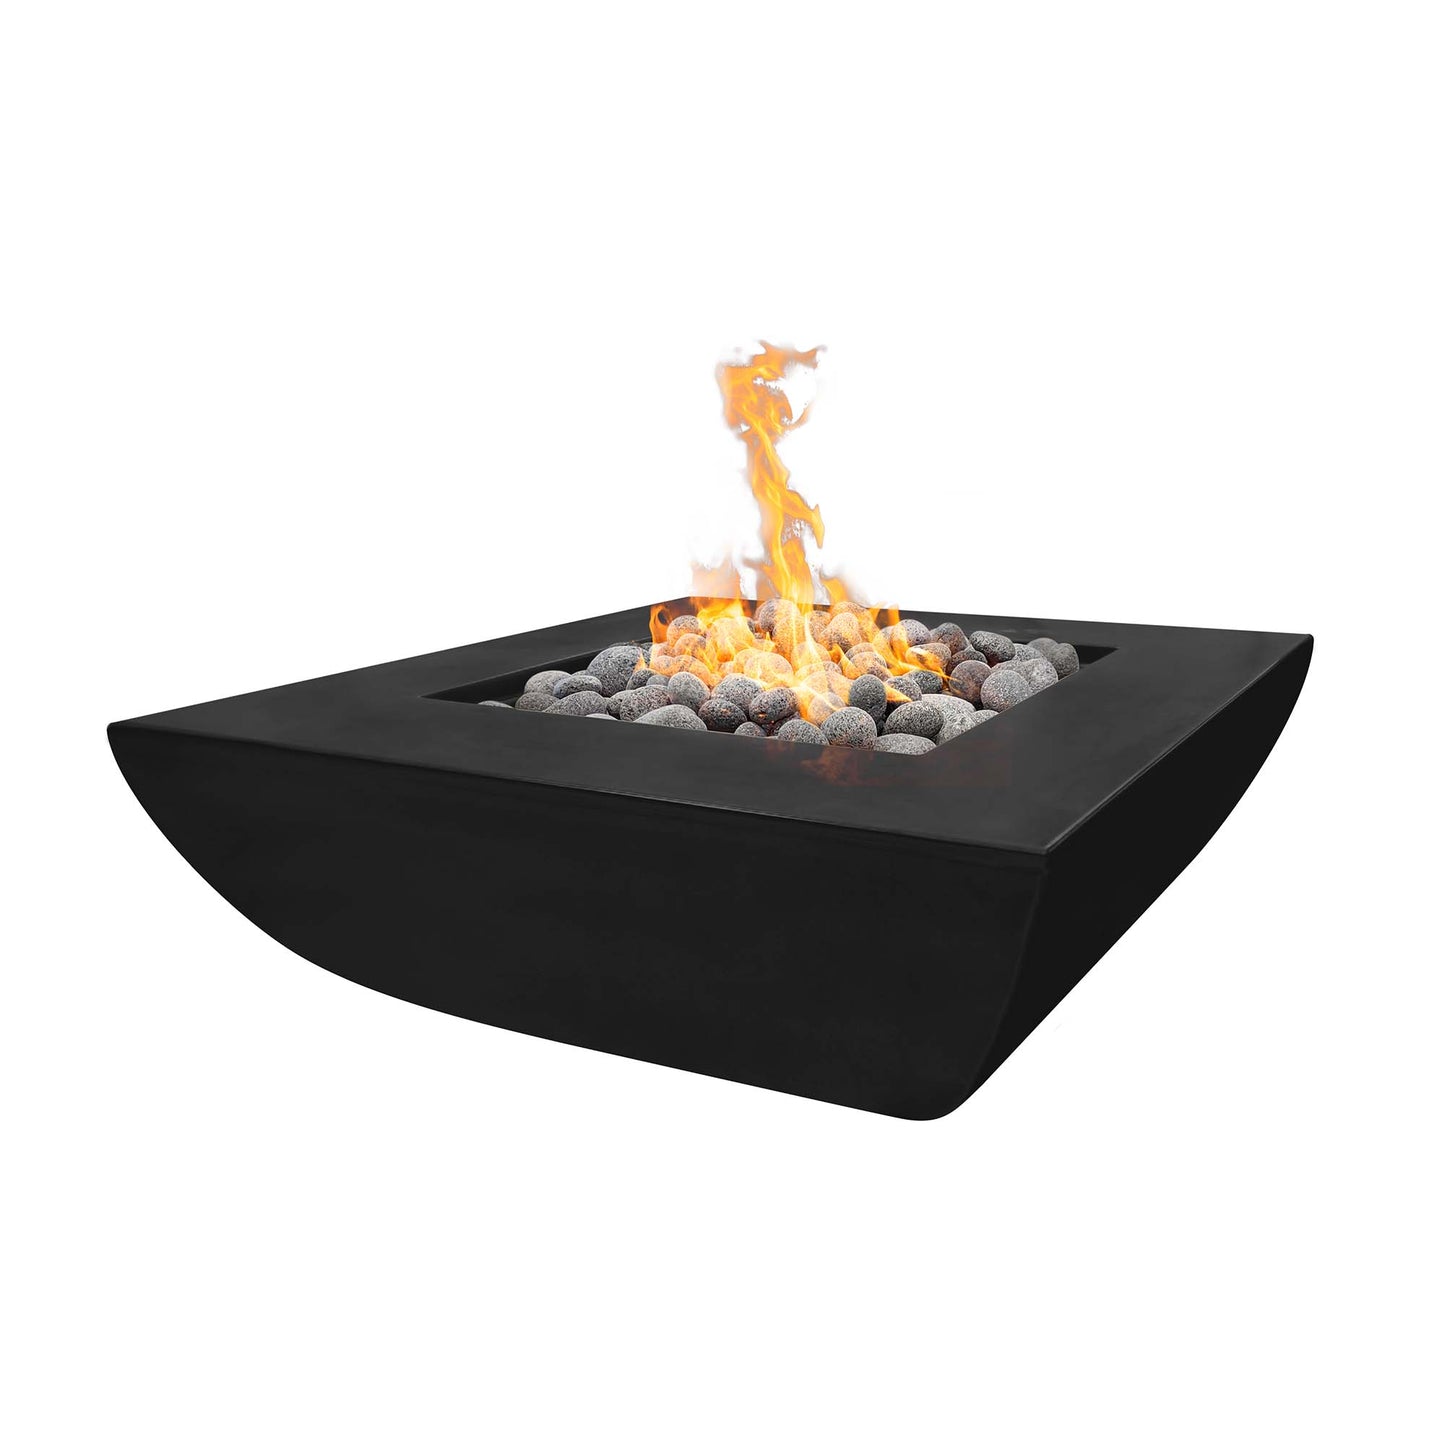 The Outdoor Plus Square Avalon 42" Metallic Copper GFRC Concrete Natural Gas Fire Pit with 12V Electronic Ignition